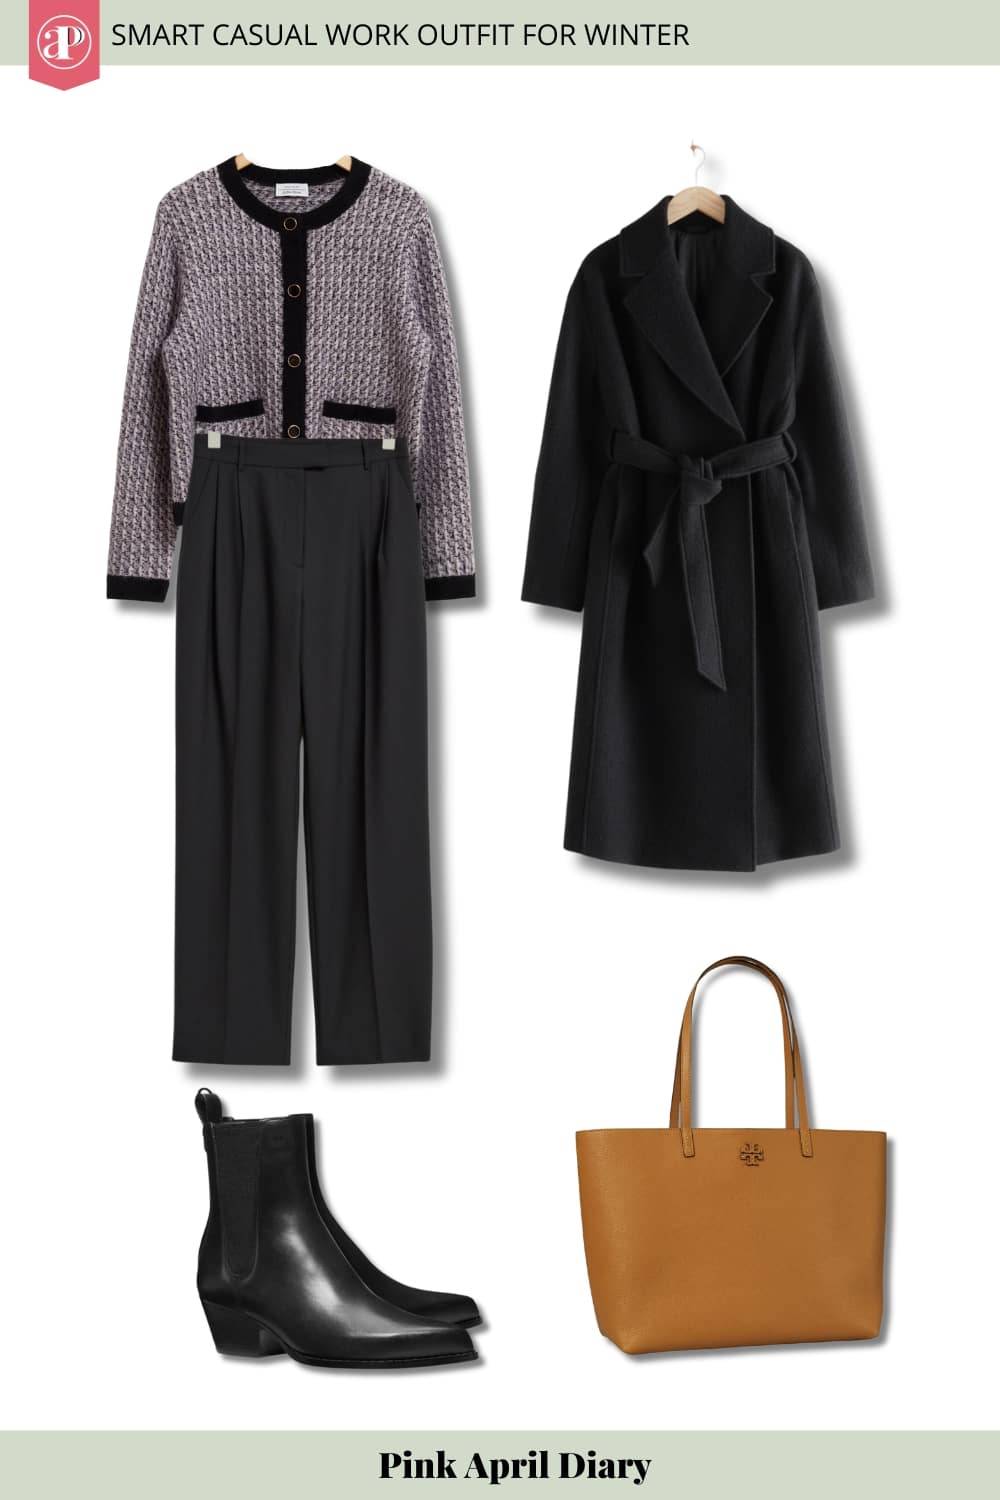 Smart Casual Winter Work Outfit 8